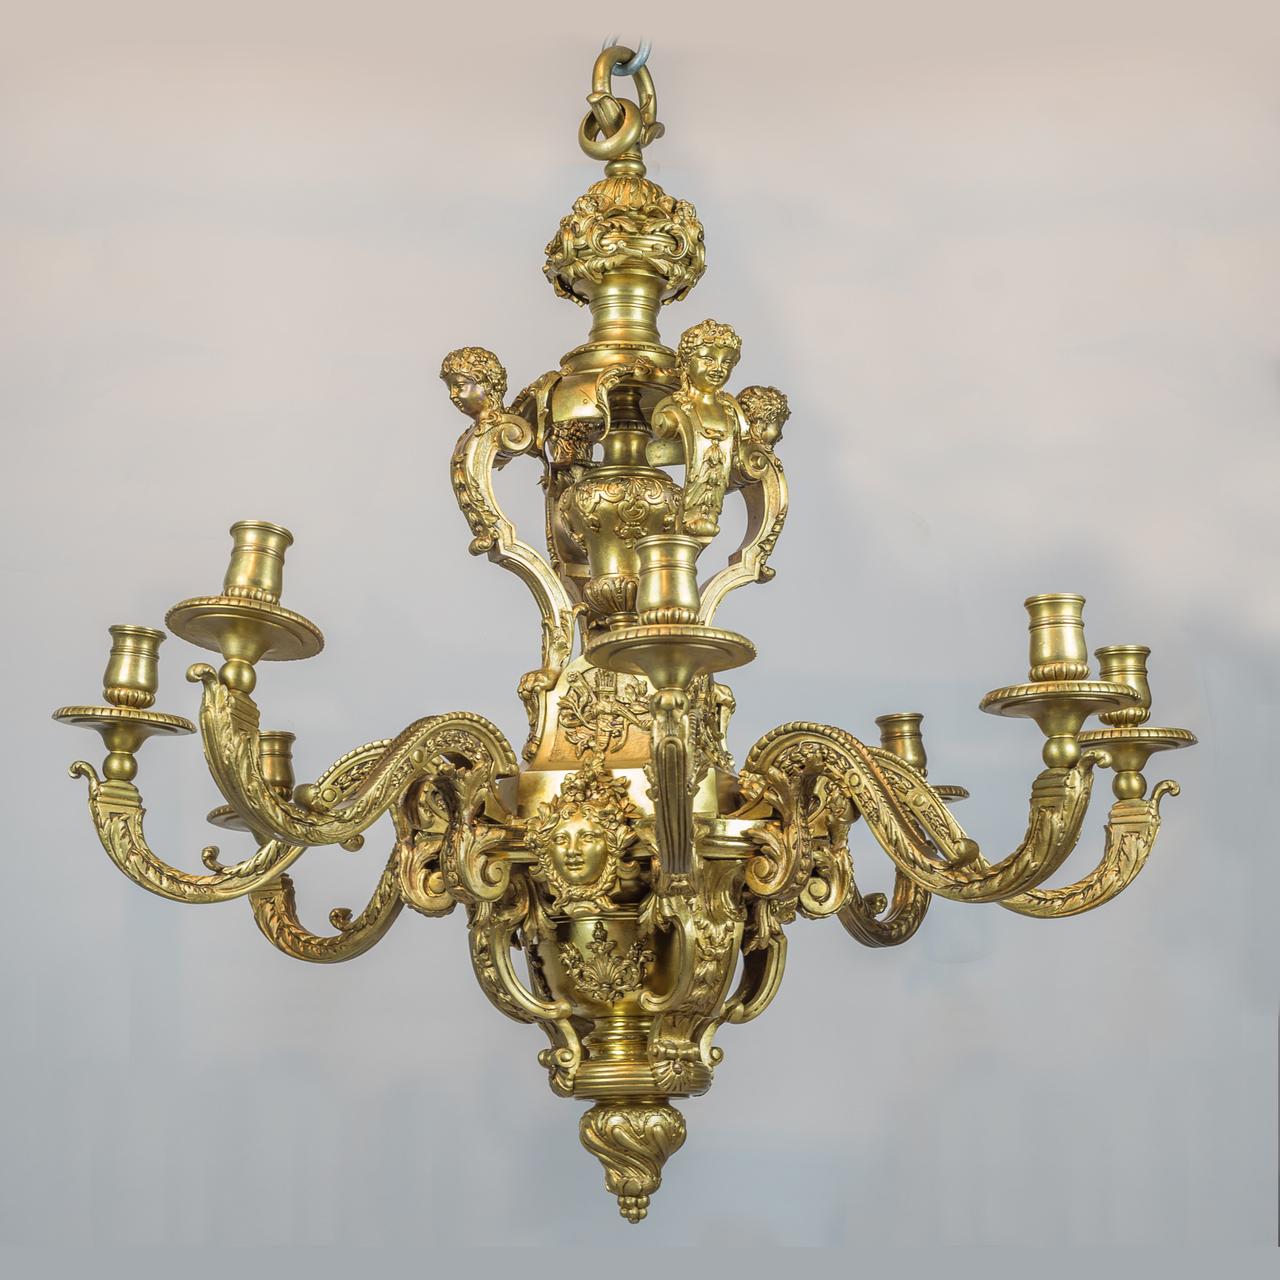 About

An exceptionally stunning, high quality of Regence style gilt bronze, eight-light chandelier with spreading ring turned stems mounted with female figural terms, above eight C-scrolled supports with mask terminals and garlands.

Origin: